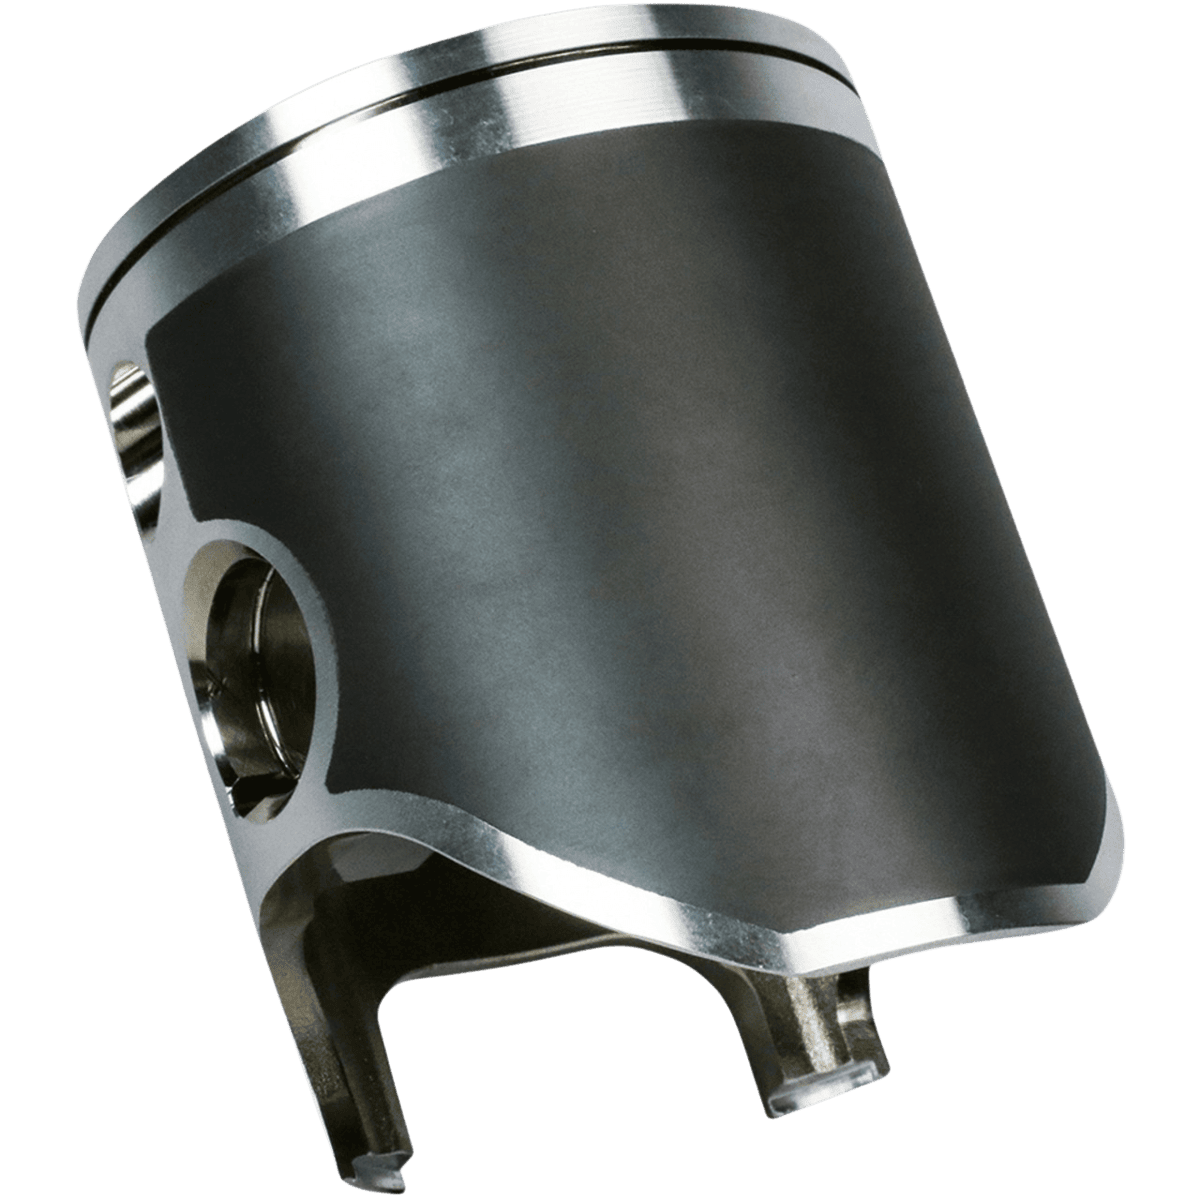 Best 2009 WR250 Piston Kit for Two strokes